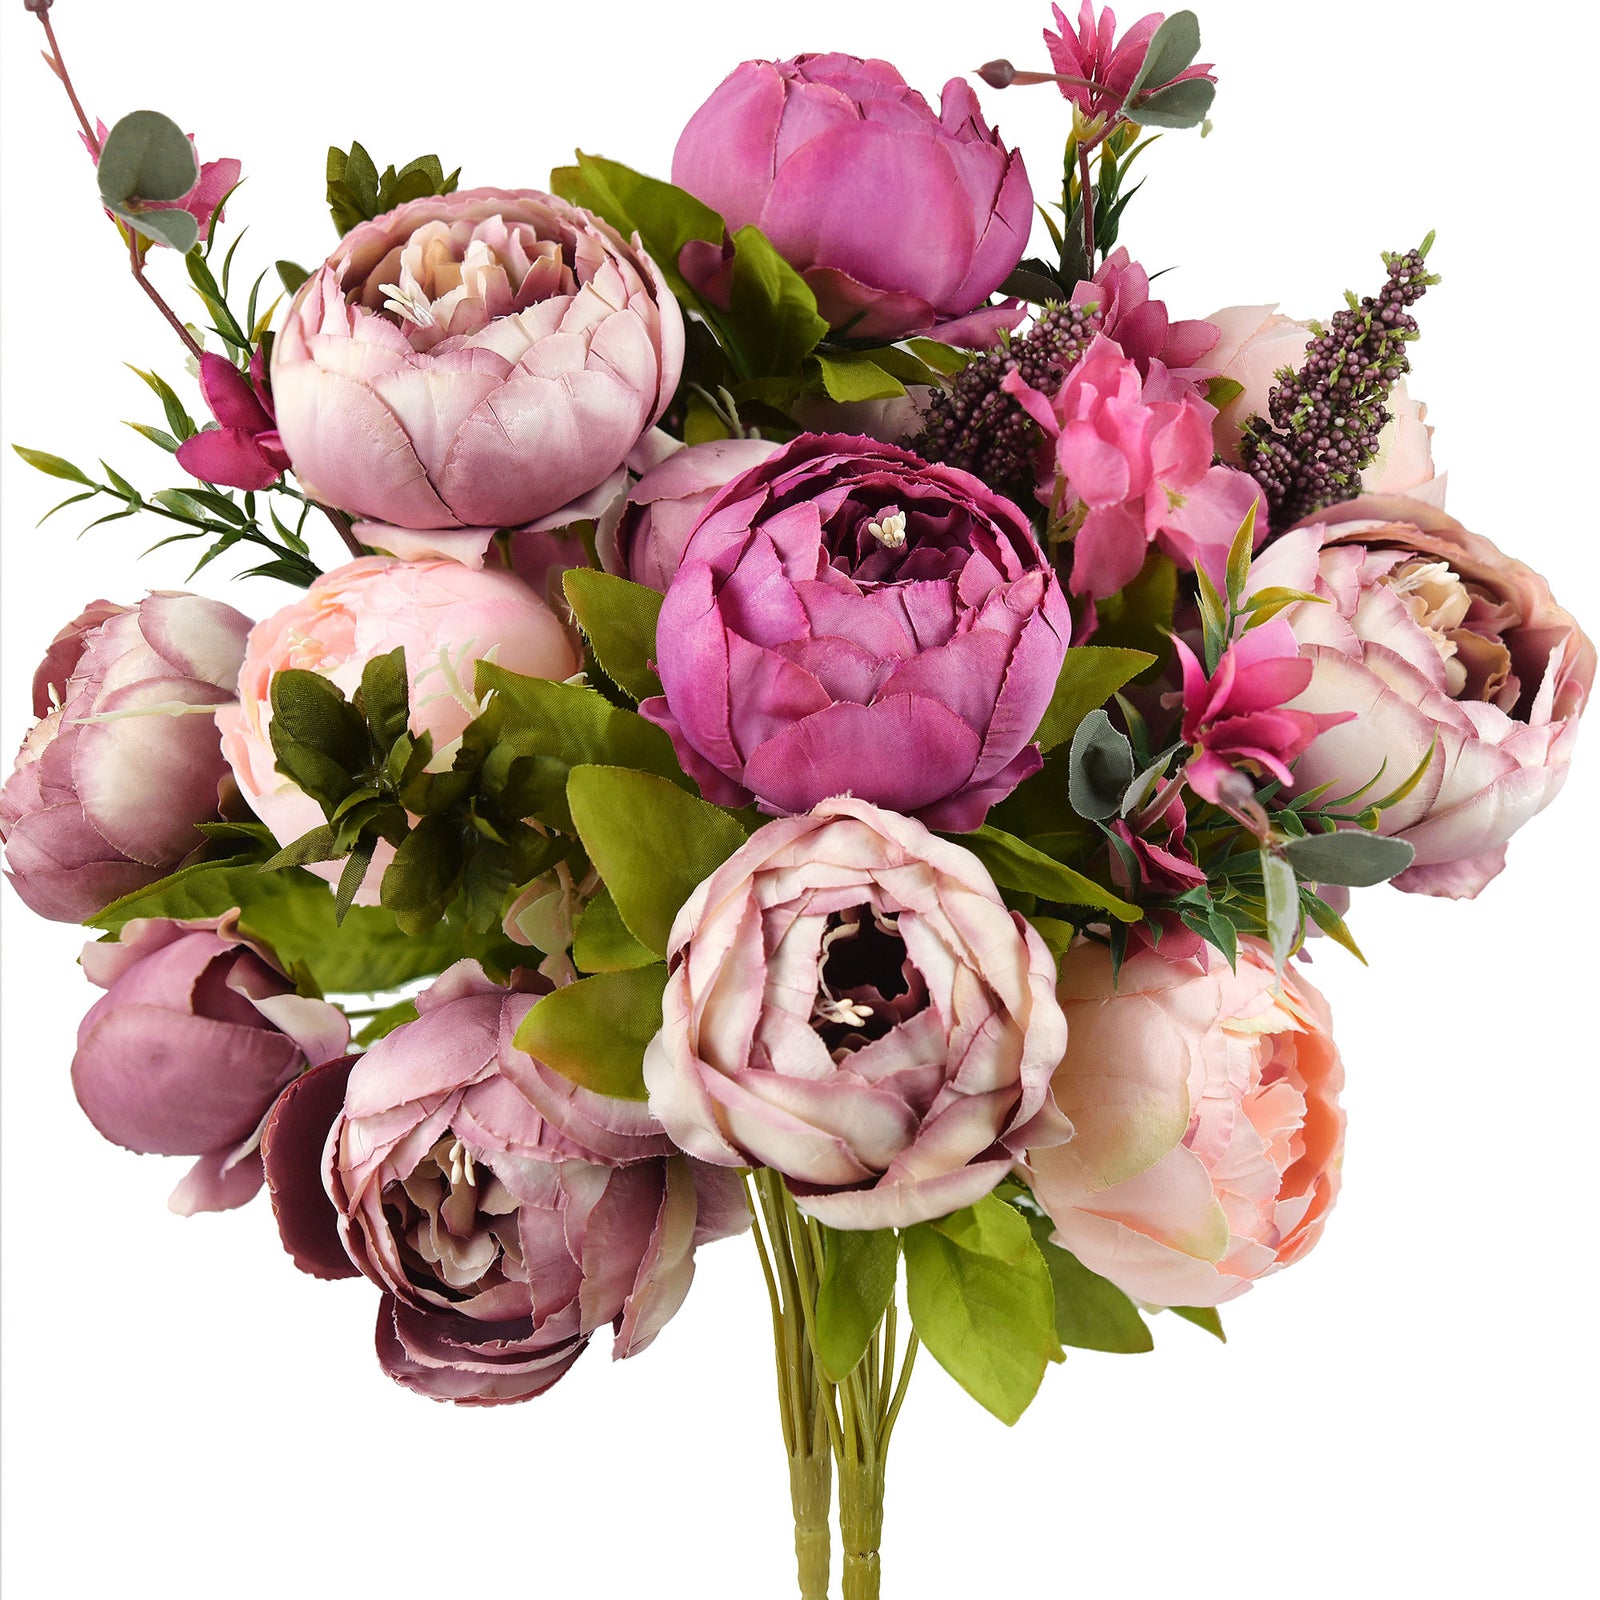 Celestial Beauty: A Pair of Eternal Peony Bouquets in Shades of Magenta, Red Oyster, Faded Pink, Pink-Purplish, and Pink. A Symphony of Color and Elegance for Any Occasion.